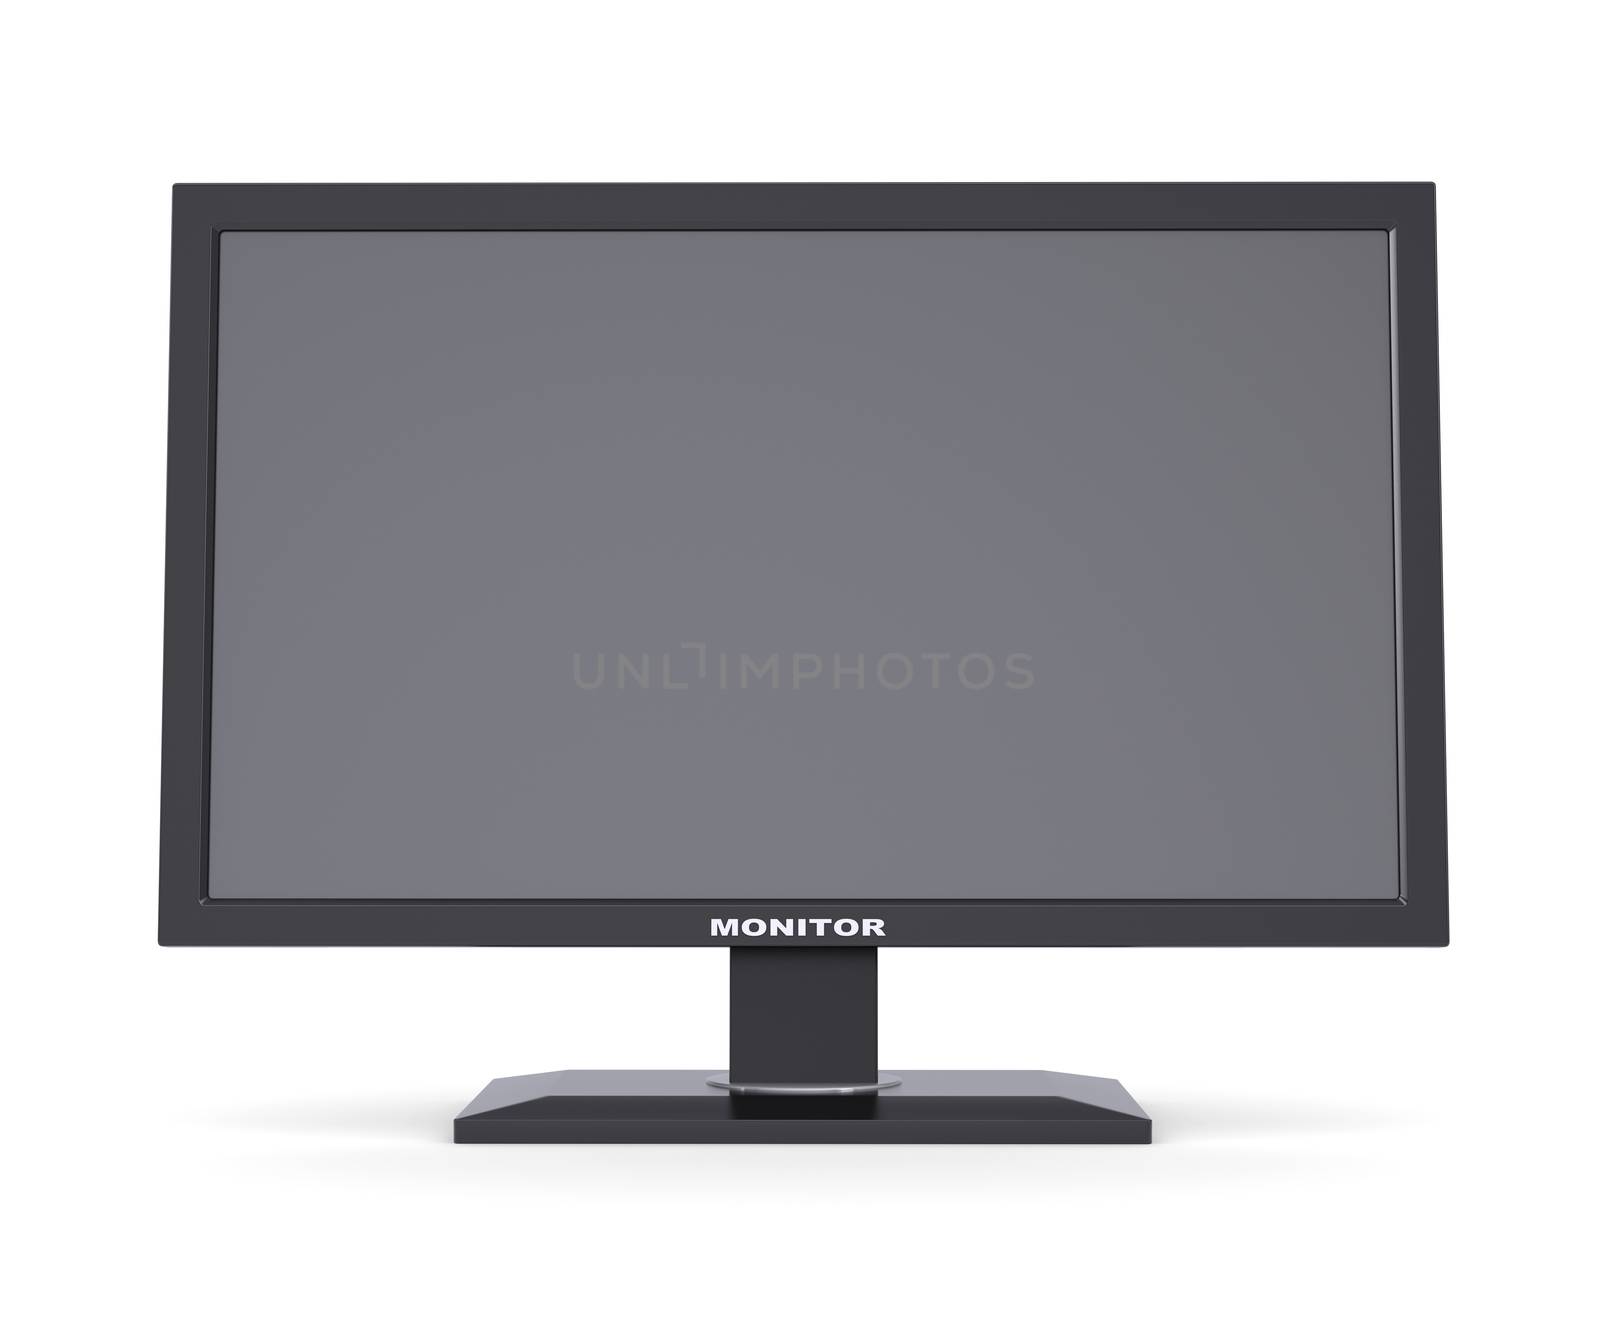 Black monitor. Isolated render on a white background